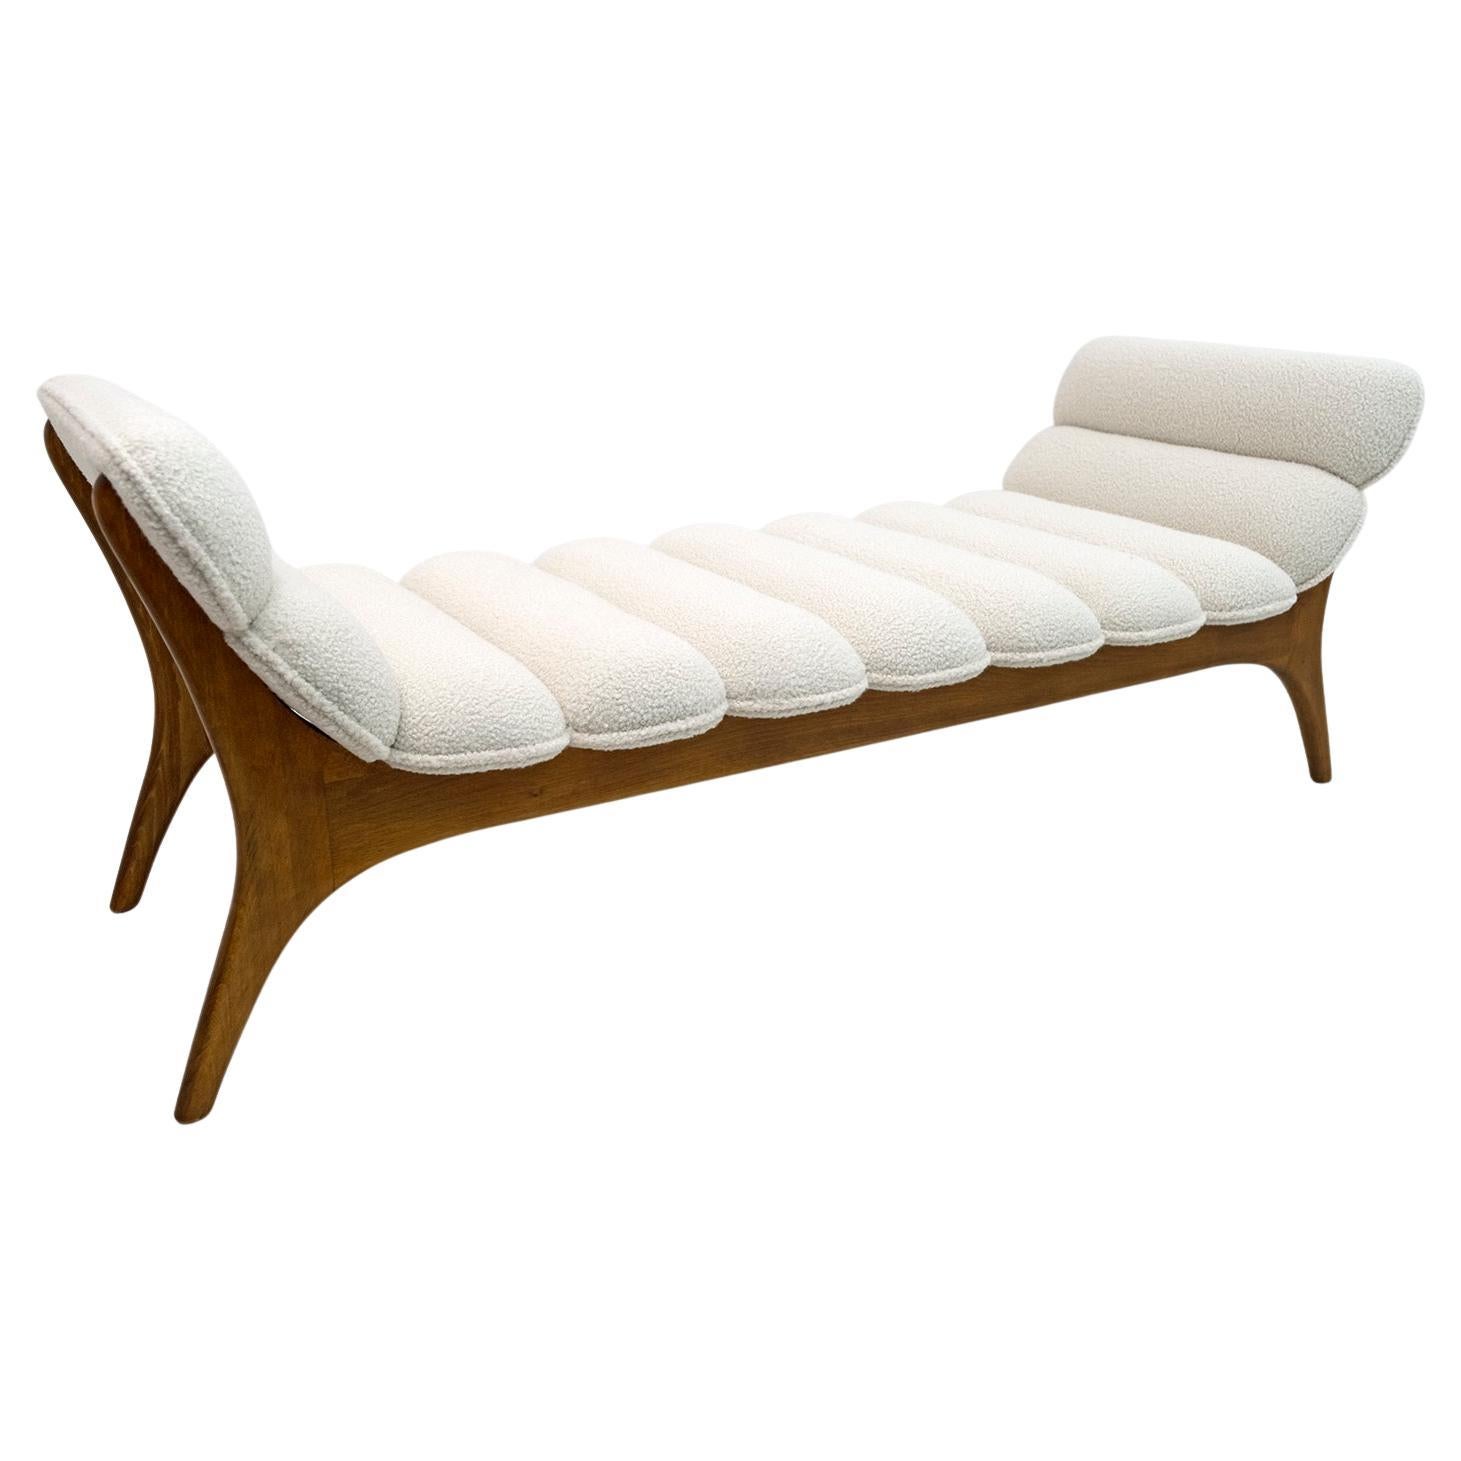 Adrian Pearsall Mid-Century Modern Walnut Chaise Lounge by Craft Associates